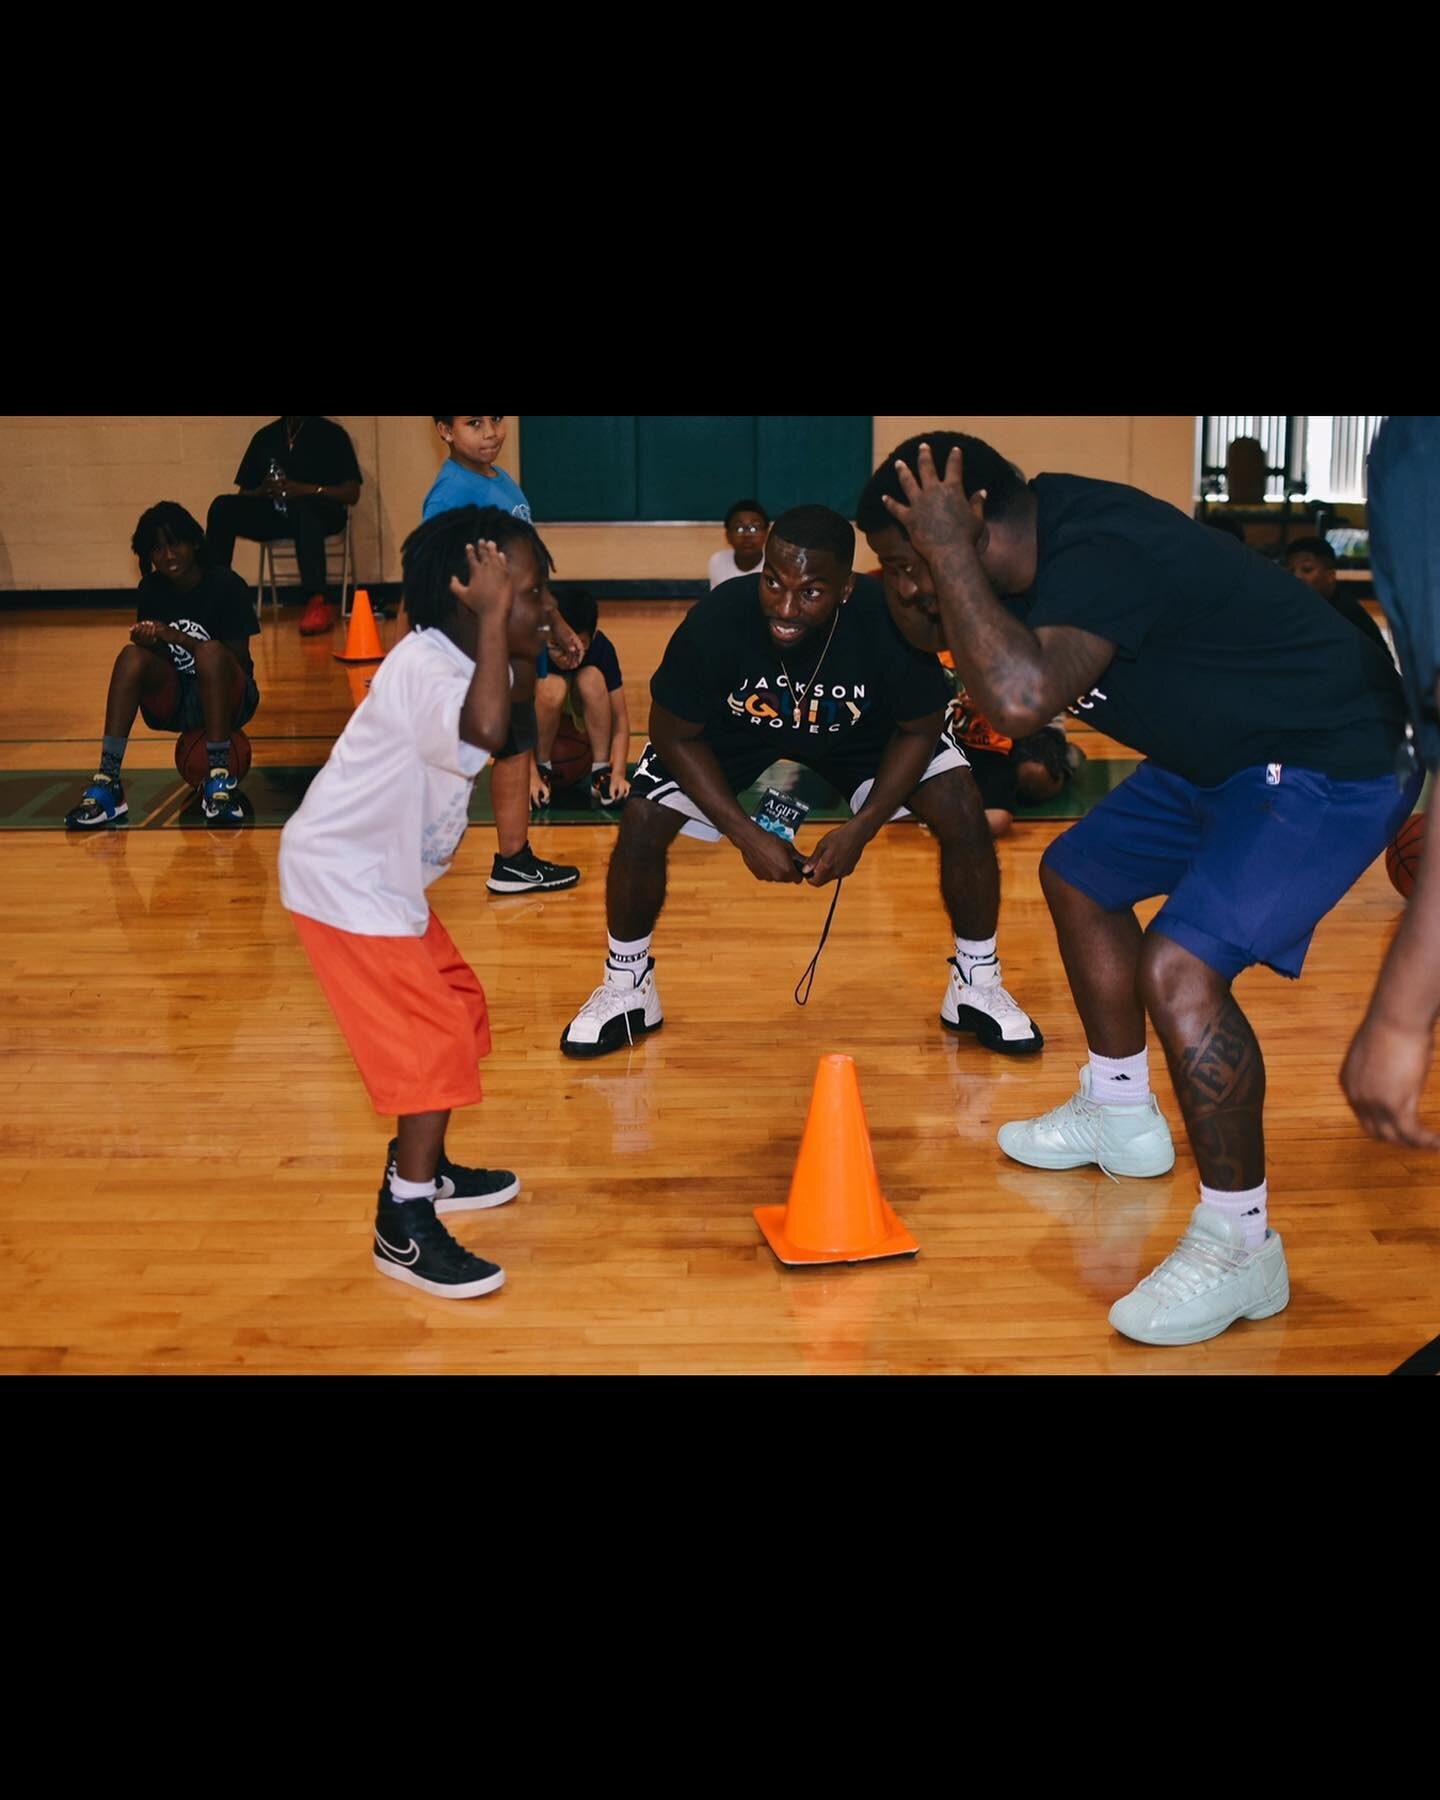 The 2nd Annual Kendall Anthony basketball camp was a success. First off I want to thank God for allowing us to have a fun and injury free camp. I also want to thank United Way and the Jackson Equity Project for sponsoring the camp. To the consolers t